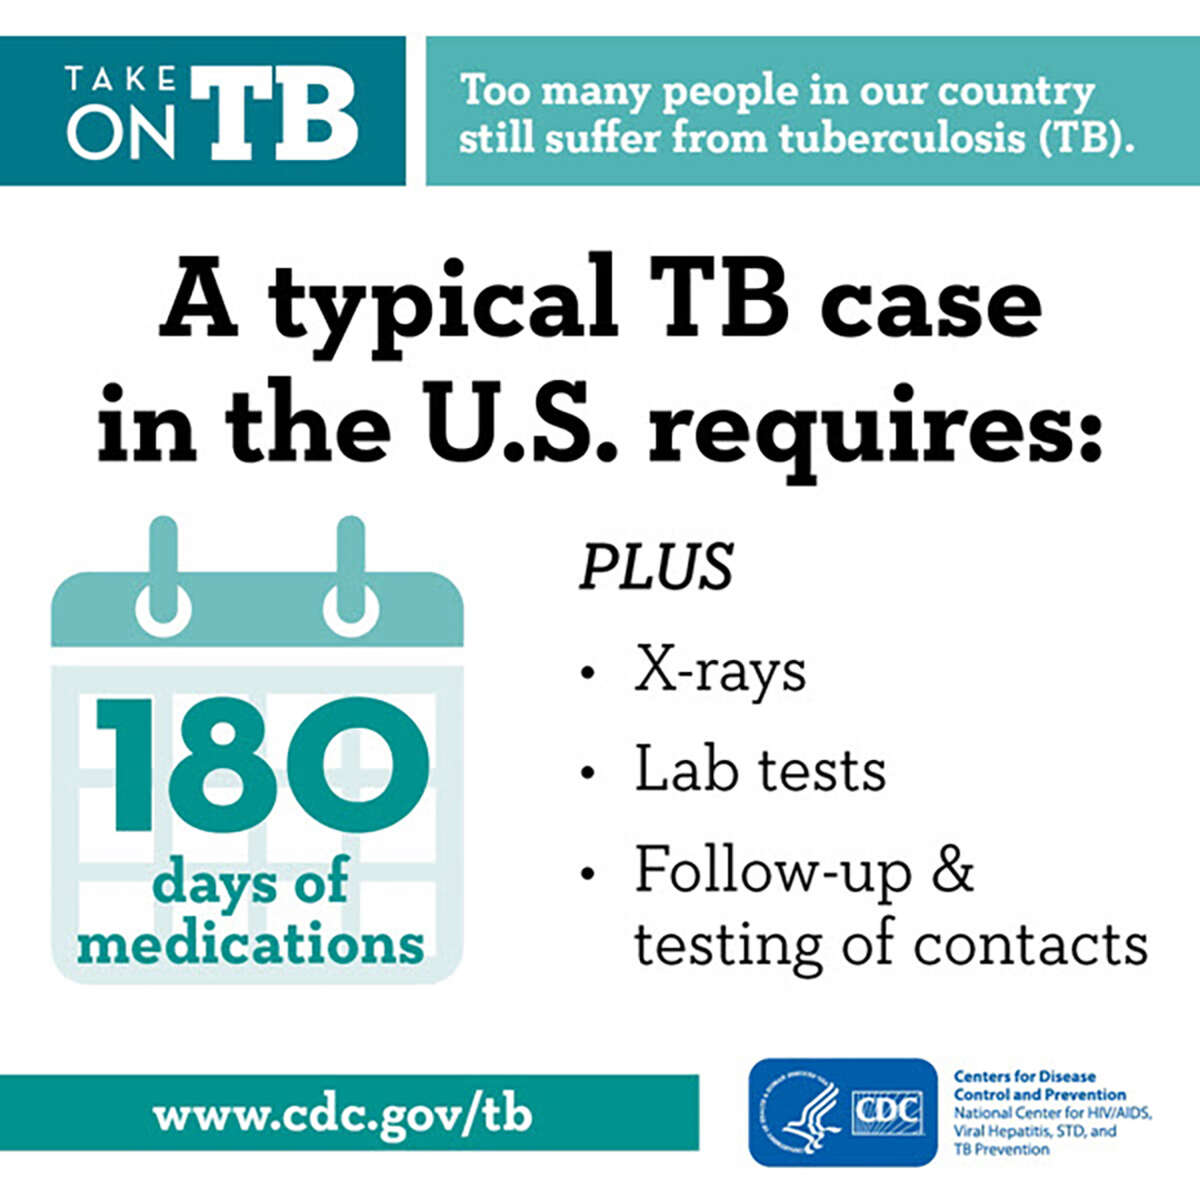 Here are some facts about tuberculosis, courtesy of the CDC. 